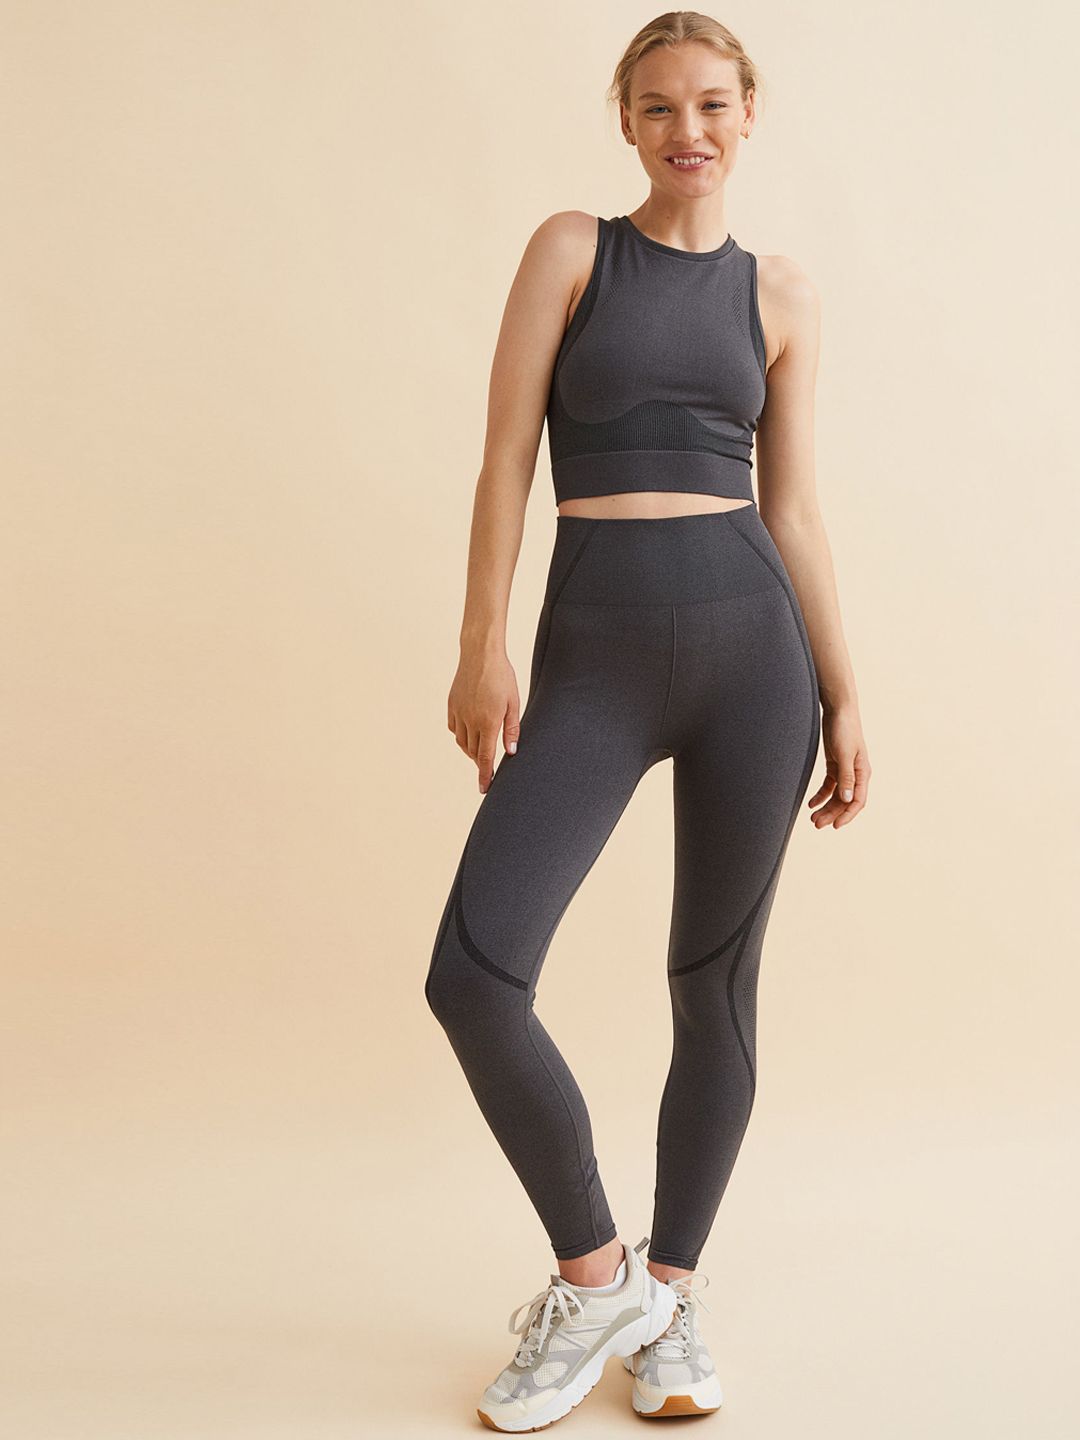 H&M Women Grey Seamless Sports Tights Price in India